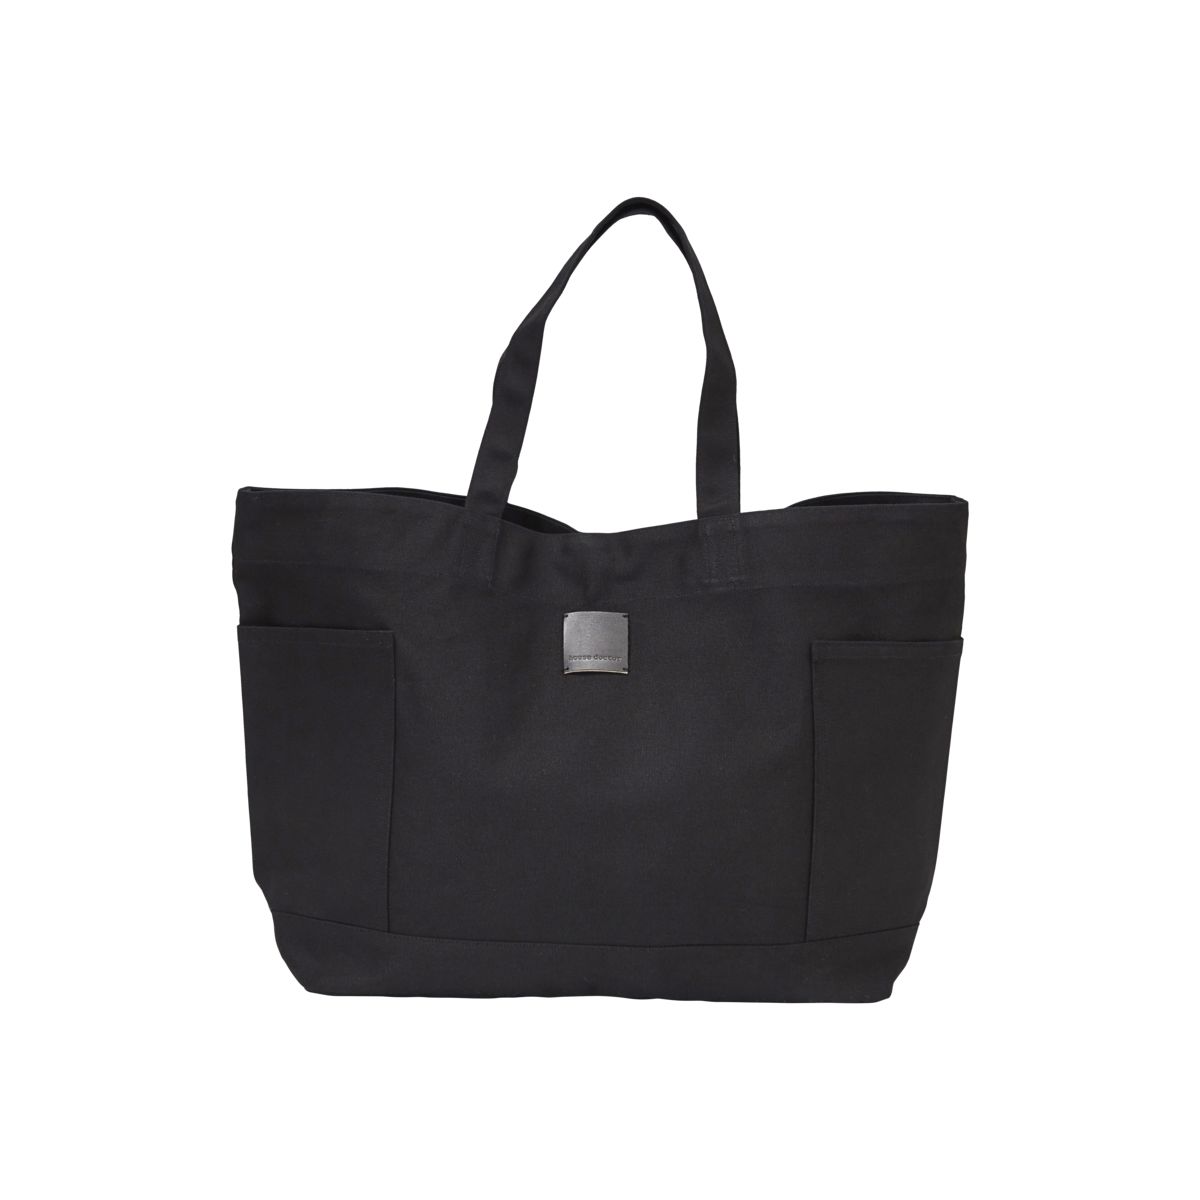 House Doctor Vacay Bag in Pirate Black